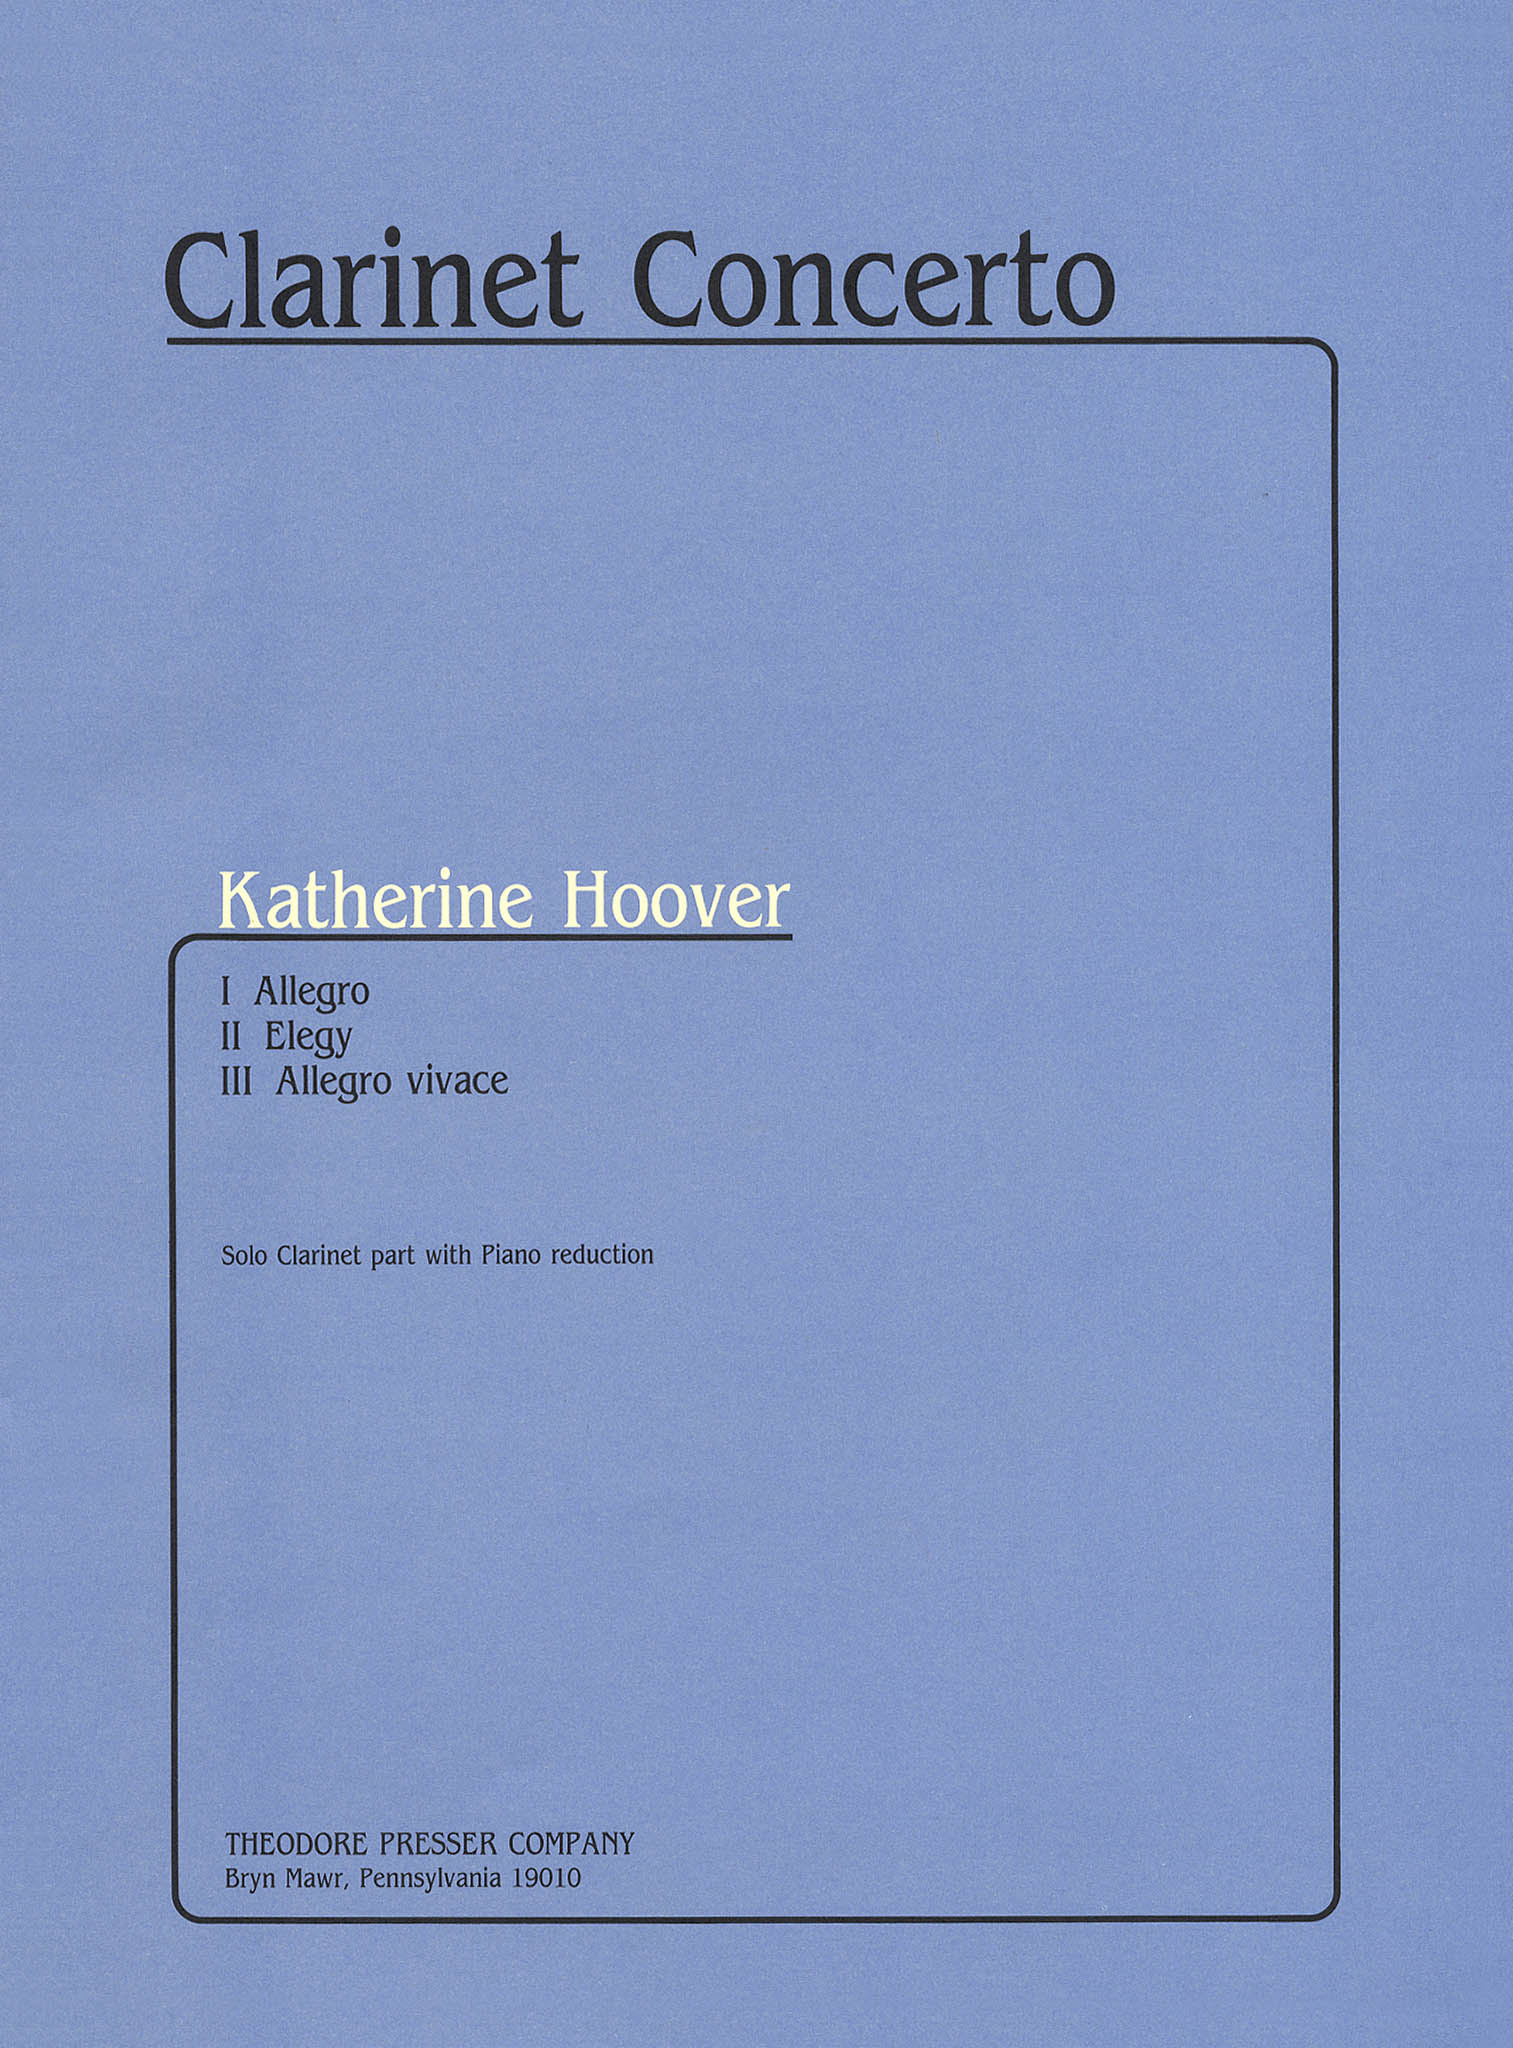 Katherine Hoover Clarinet Concerto, Op. 38 piano reduction cover